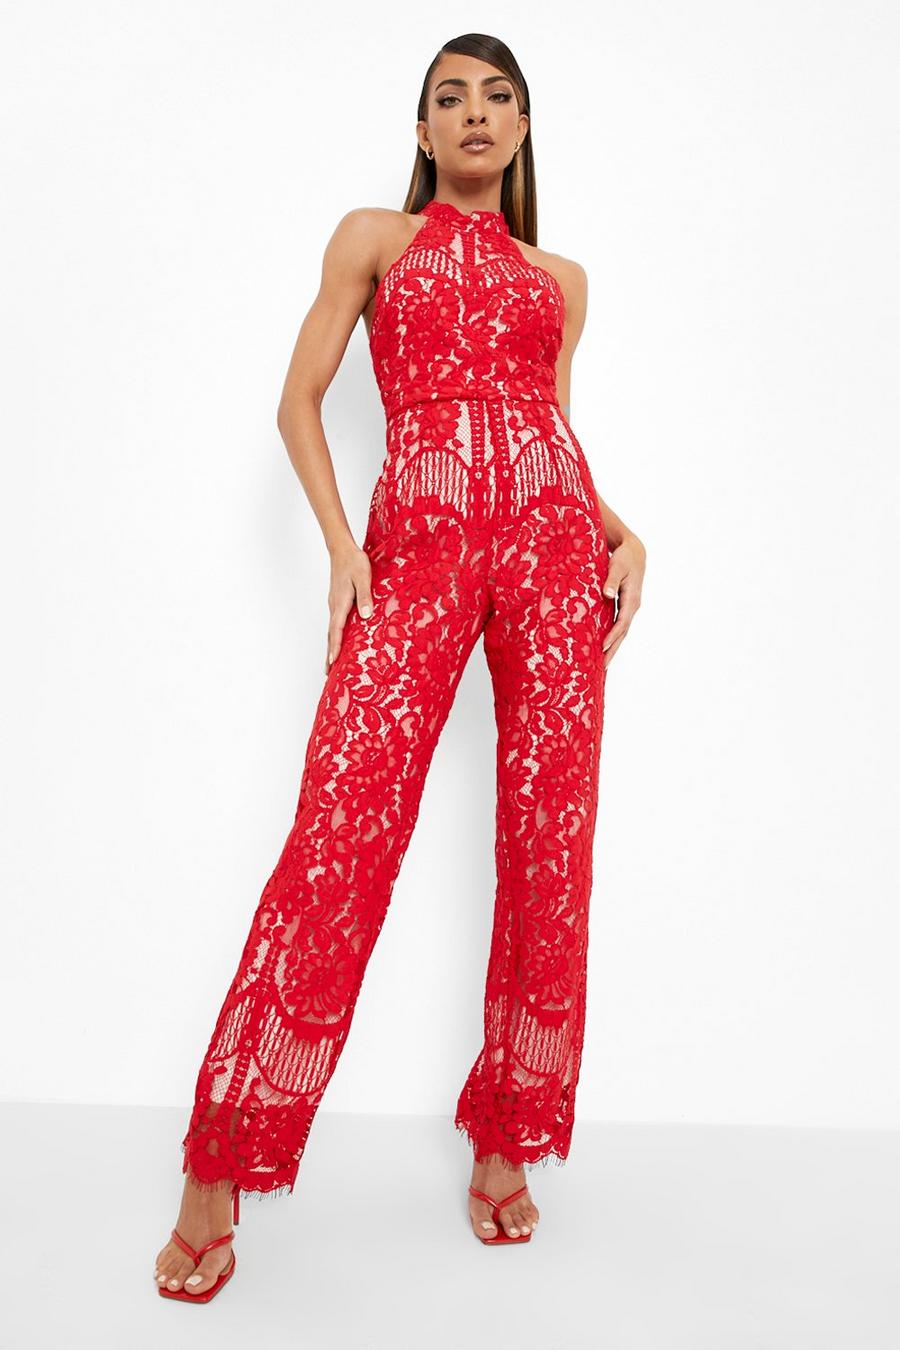 Red Lace Halterneck Sleeveless Jumpsuit